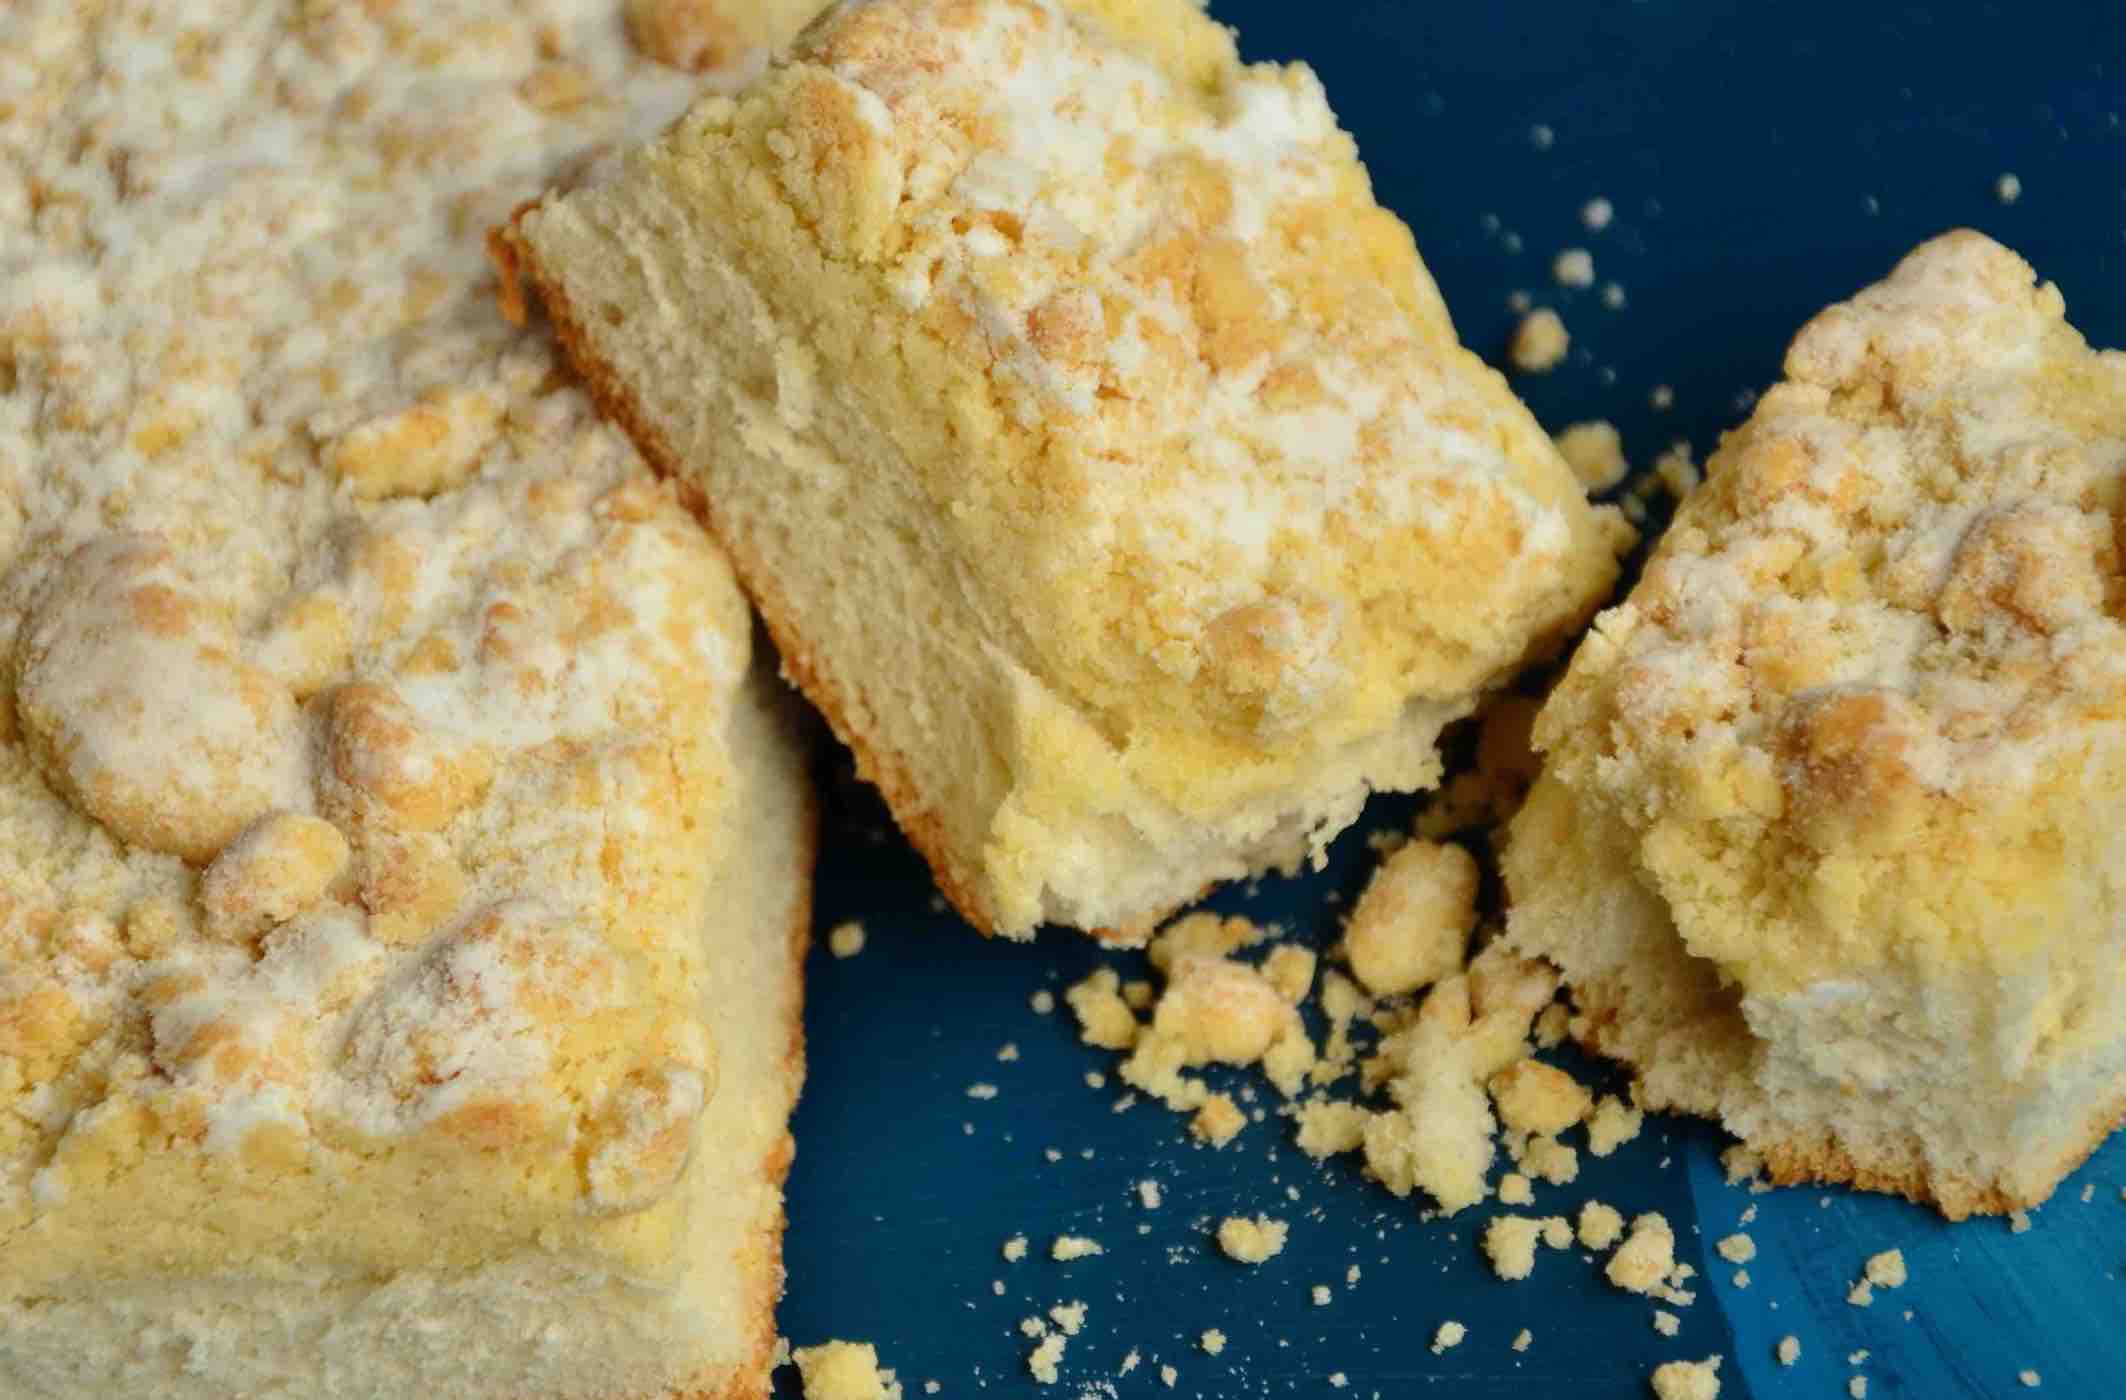 Reliable Recipes: Jean Trebek shares the amazing "Best Ever Crumb Cake Recipe" from Elaine Khosrova's book "Butter: A Rich History".